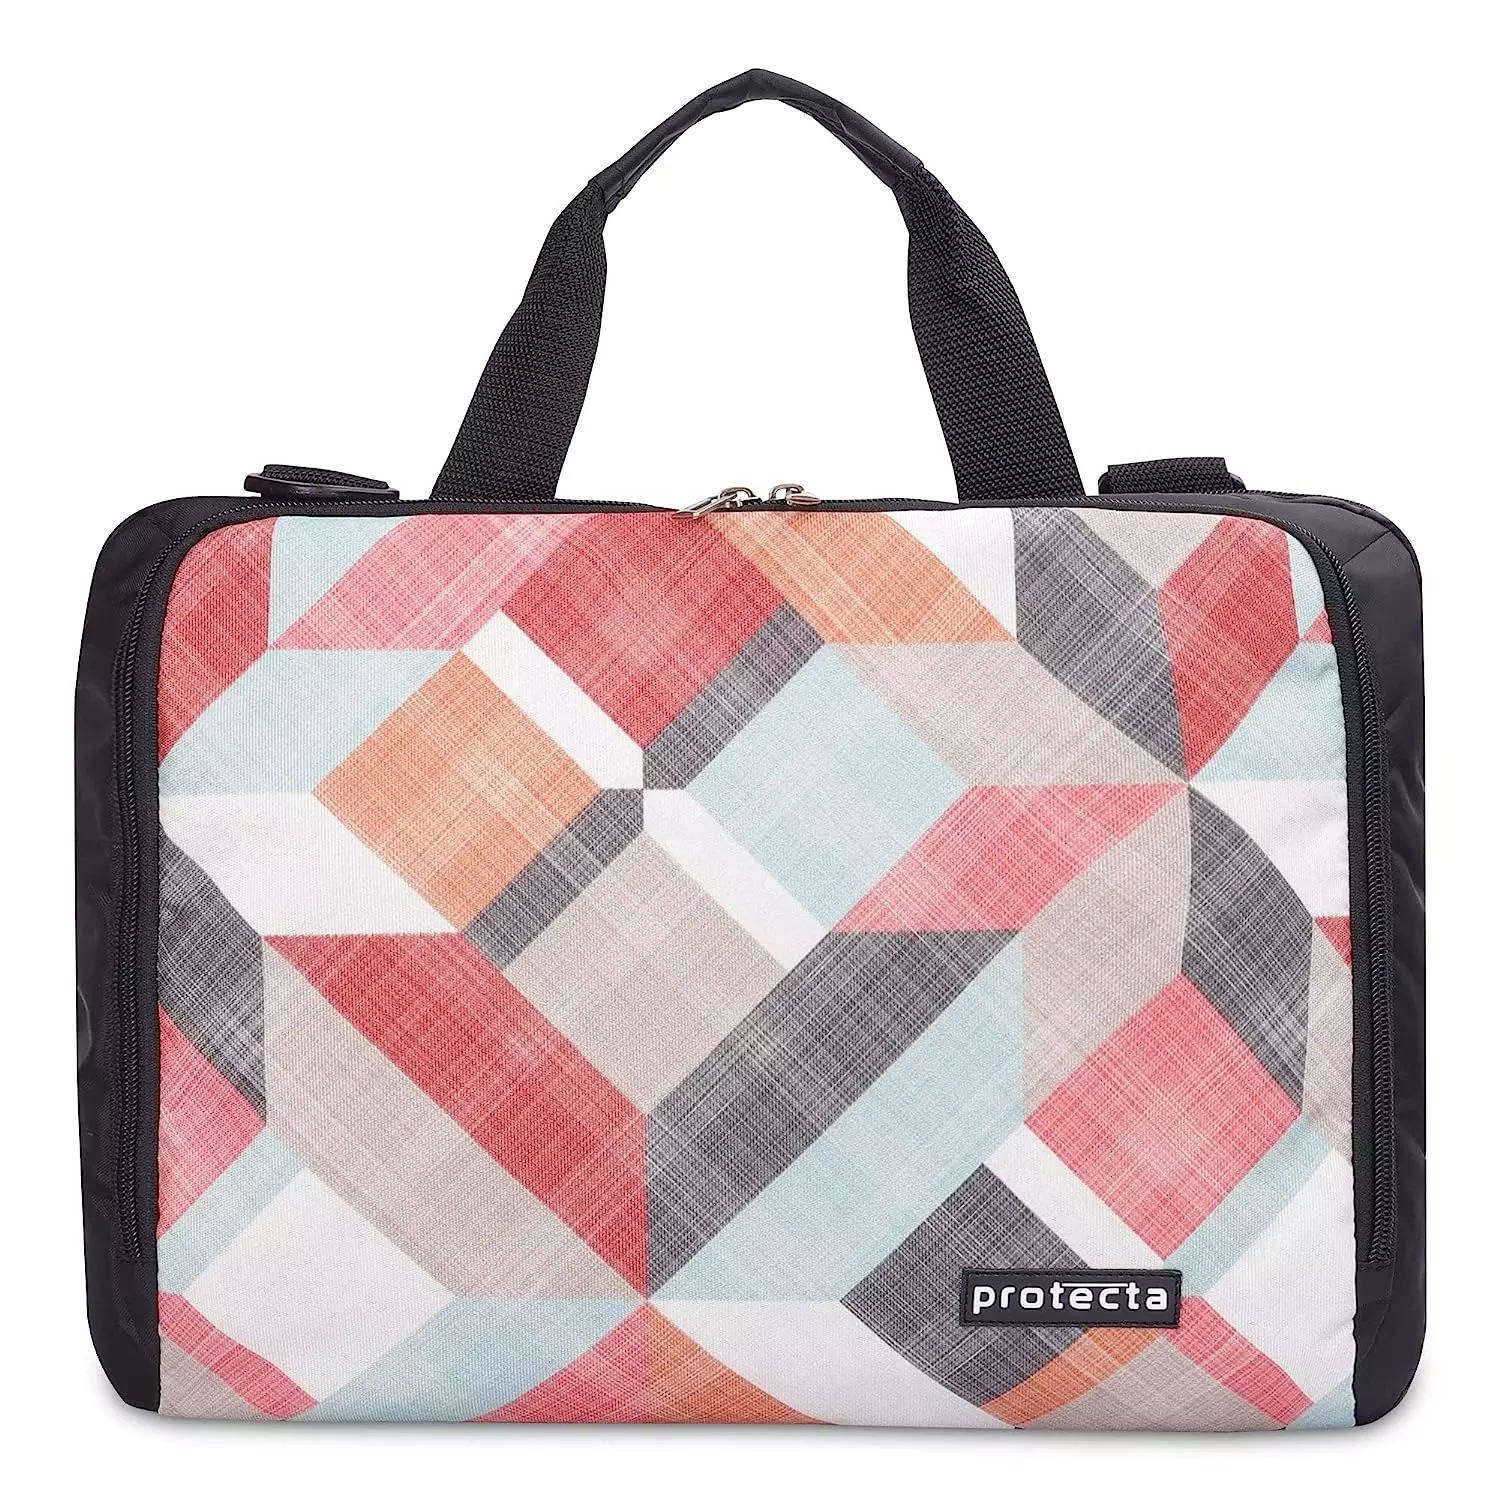 Caramel Smooth Pebble - All About The Benjamins - Thirty-One Gifts -  Affordable Purses, Totes & Bags